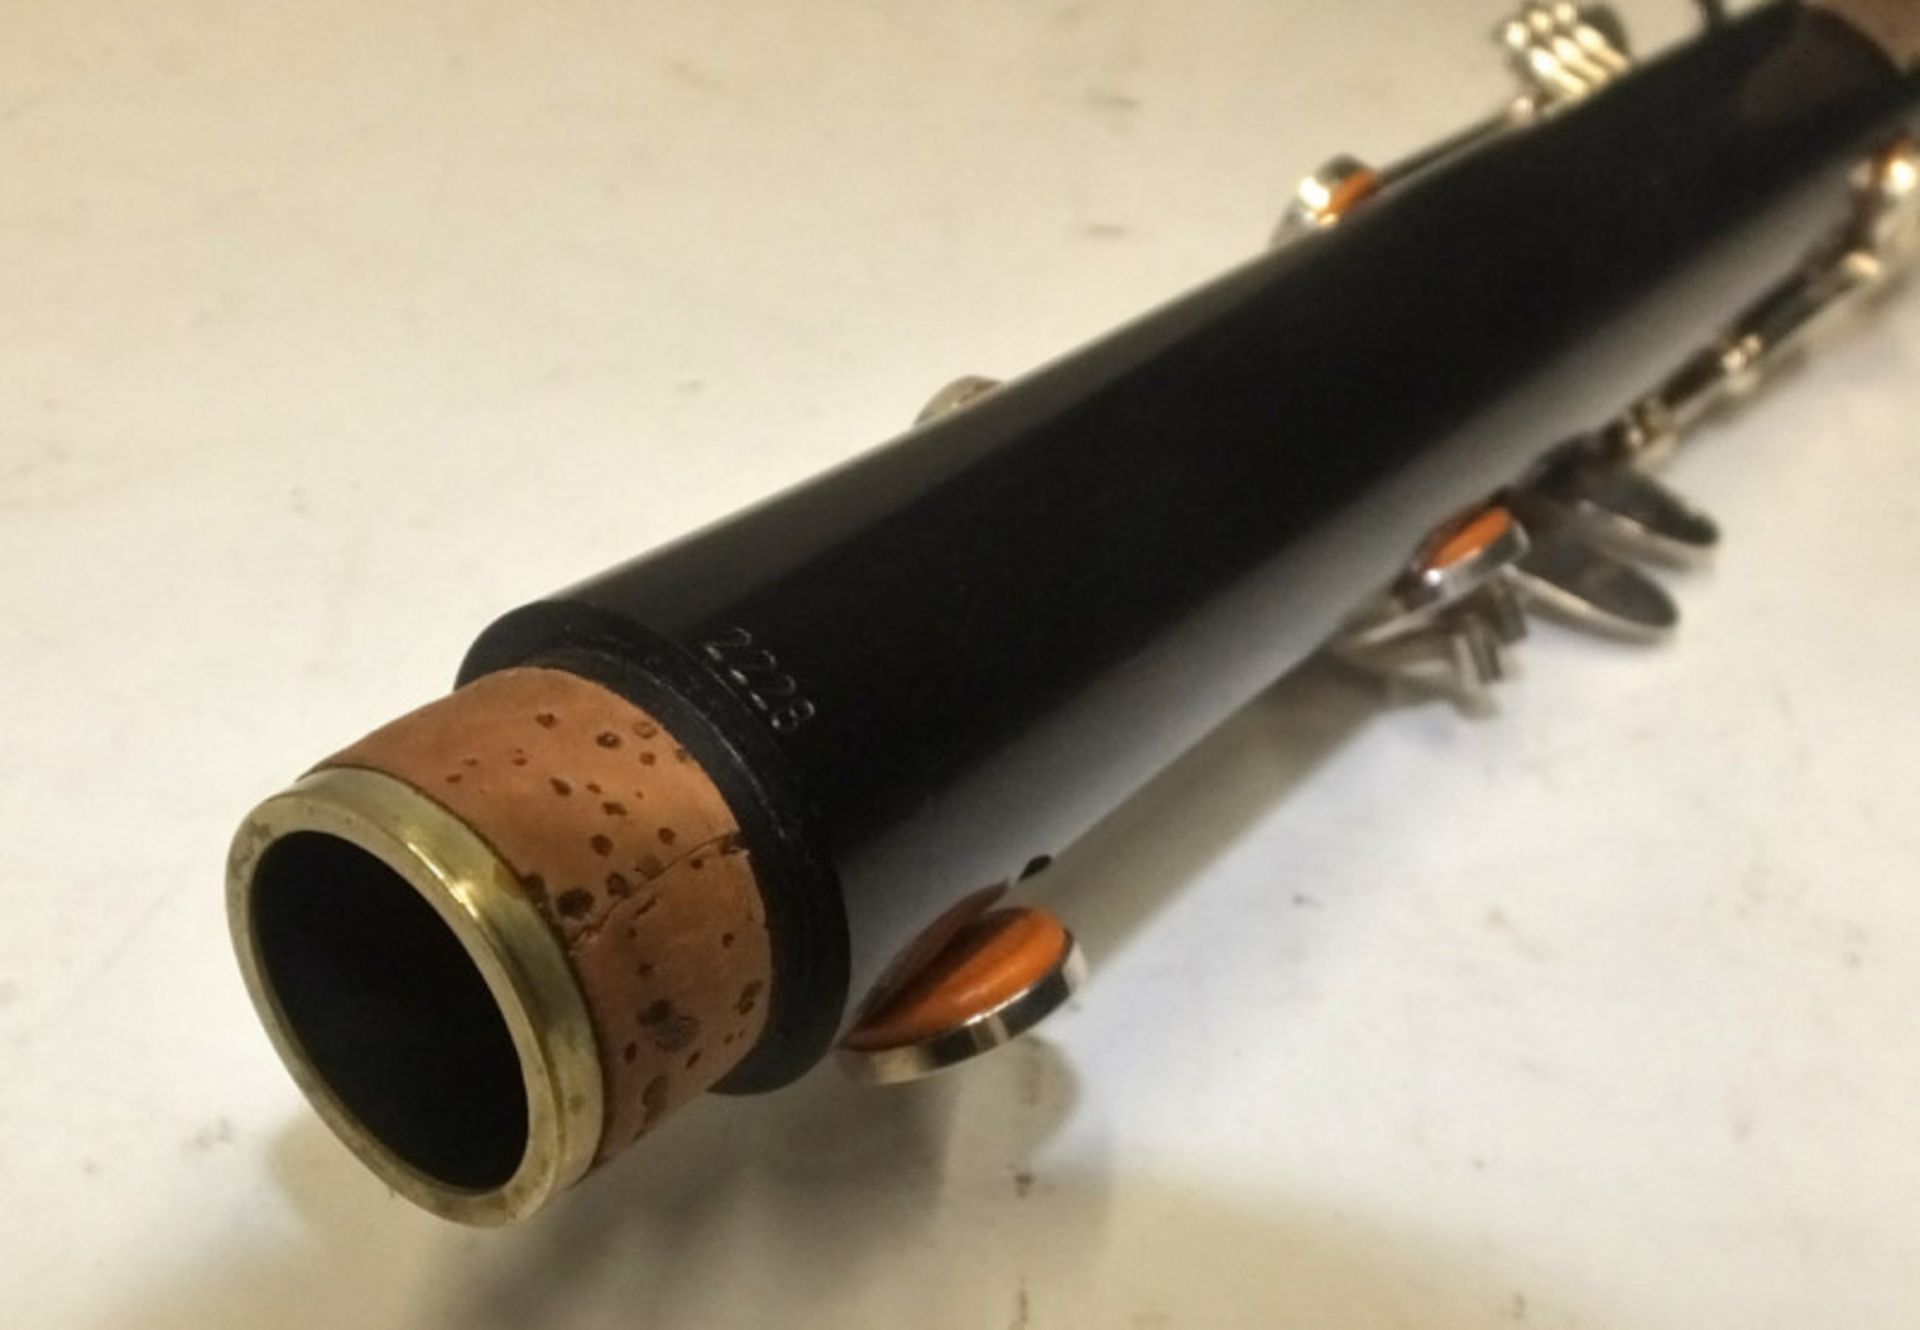 Howarth S2 Clarinet in case - Serial Number - 2228. - Image 9 of 17